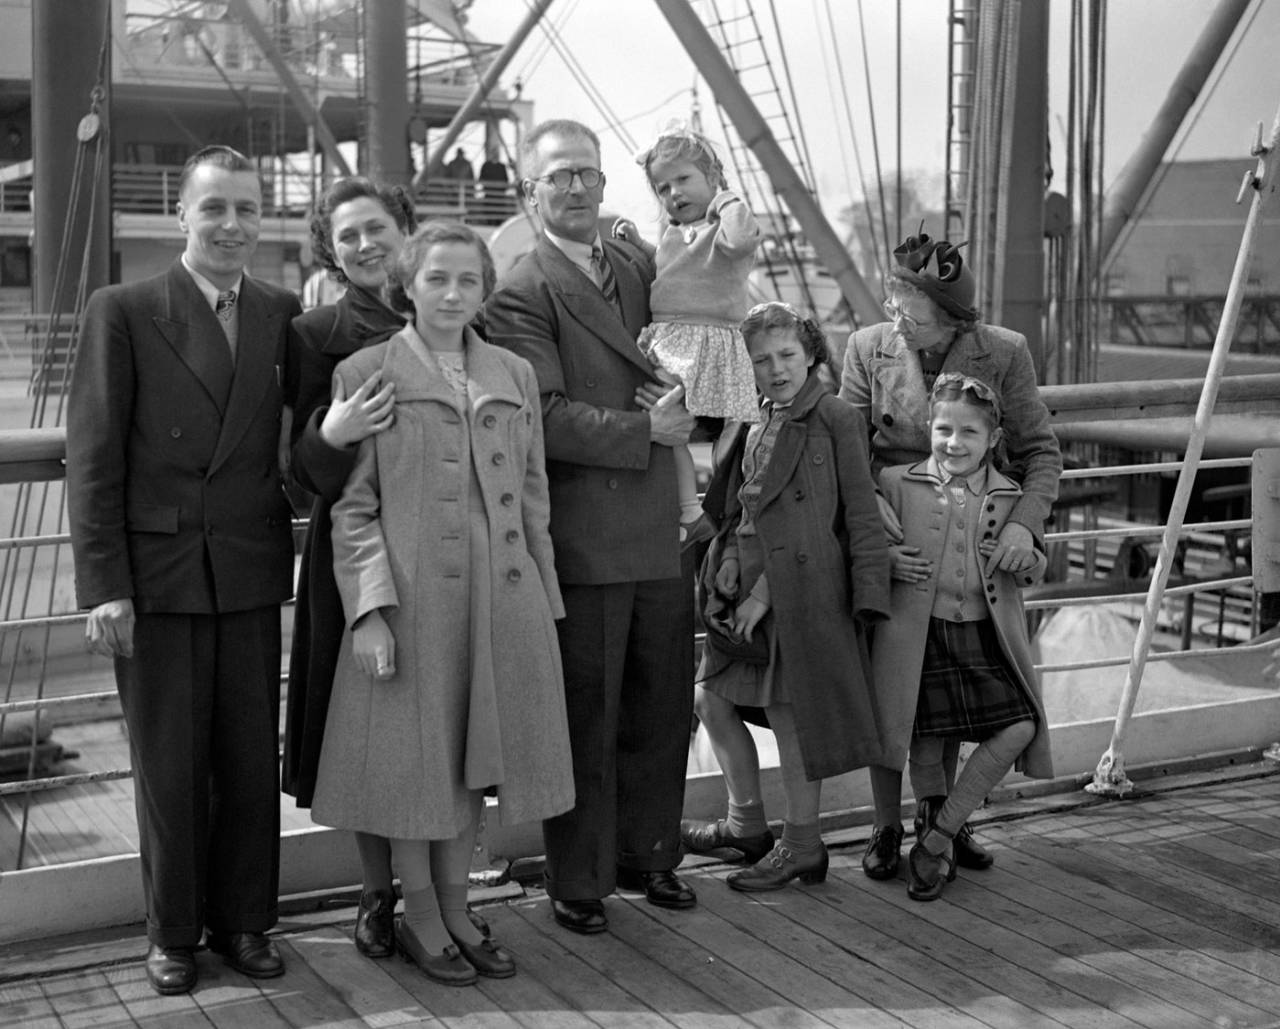 Harold Larwood and his family on board the <i>Orontes</I> at Tilbury before migrating to Australia, April 27, 1950